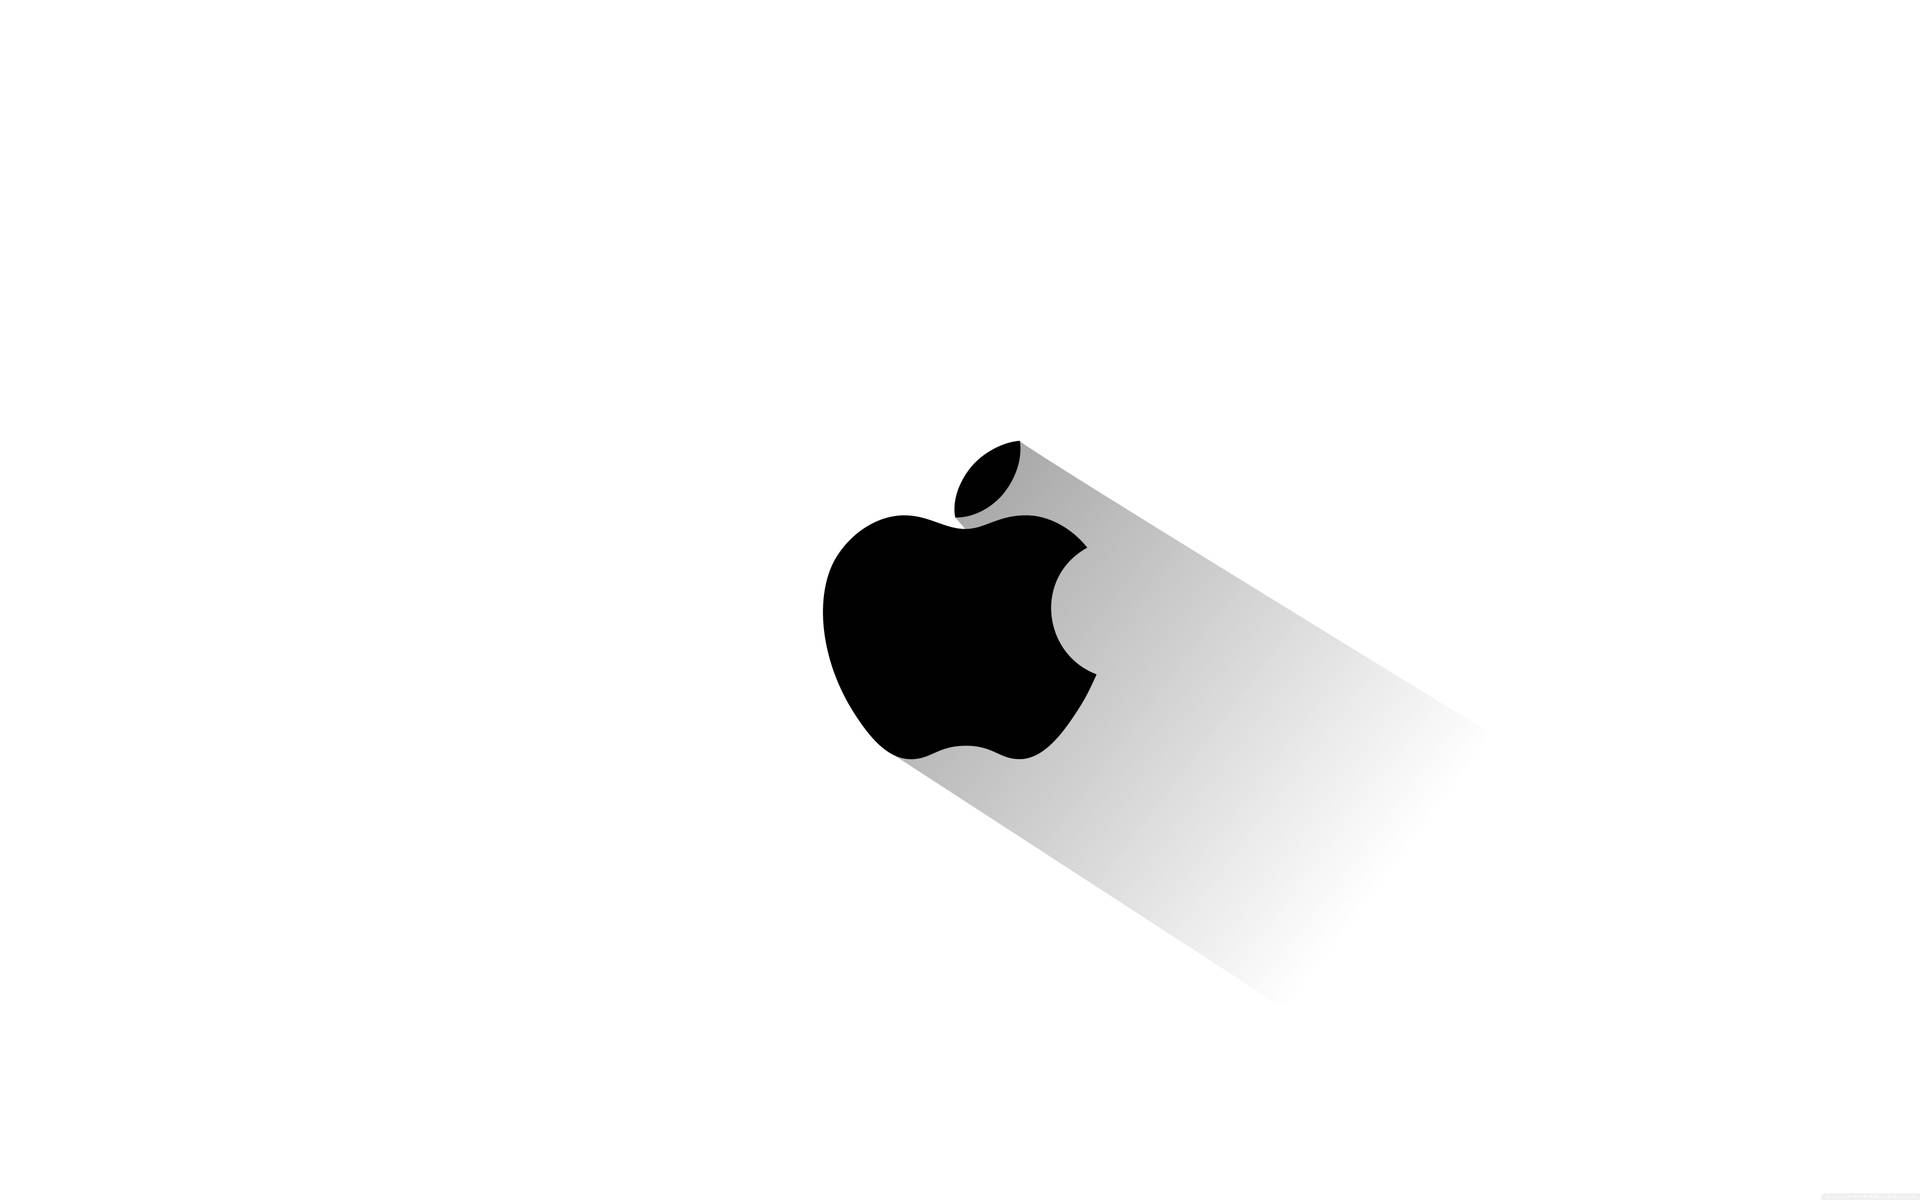 Black Apple Logo With Shadow On White Background